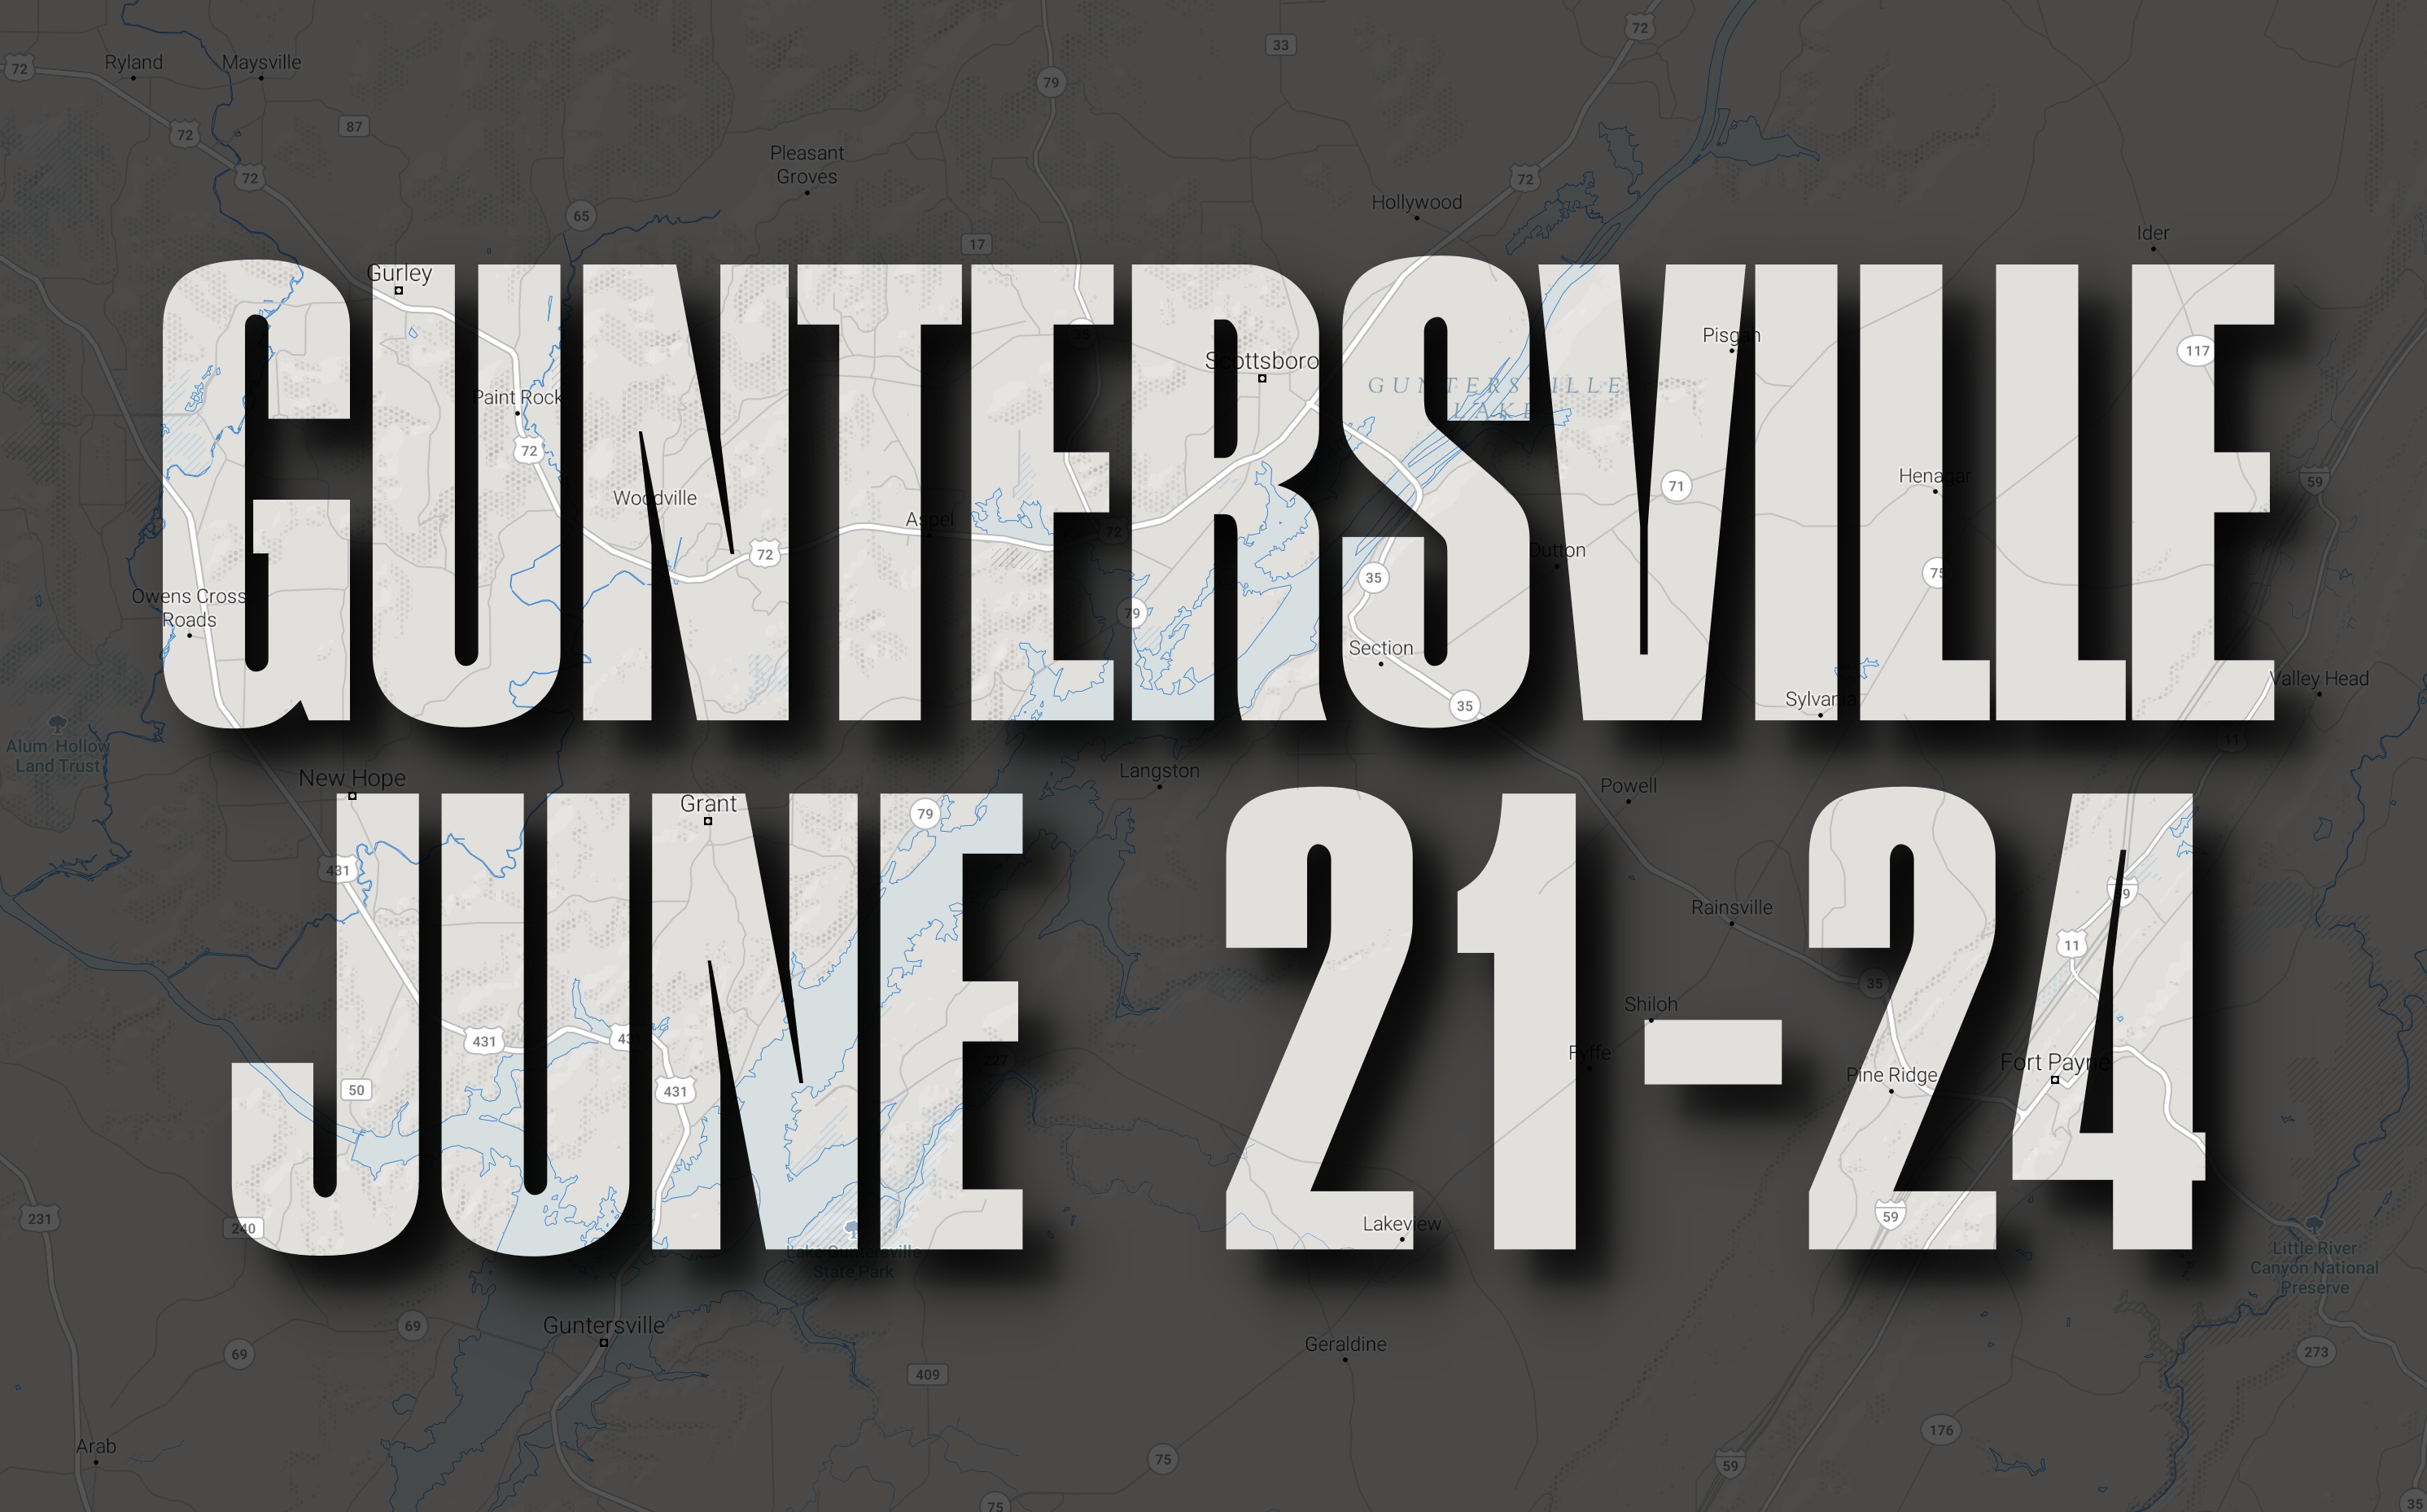 In June, the Elites head to famed Lake Guntersville in Alabama, site of 22 previous B.A.S.S. pro tournaments. This visit will break the tie with Lake Okeechobee, and the brief tie with the St. Johns River, pushing Guntersville to No. 2 on the most visited fisheries list behind Sam Rayburn (32).
